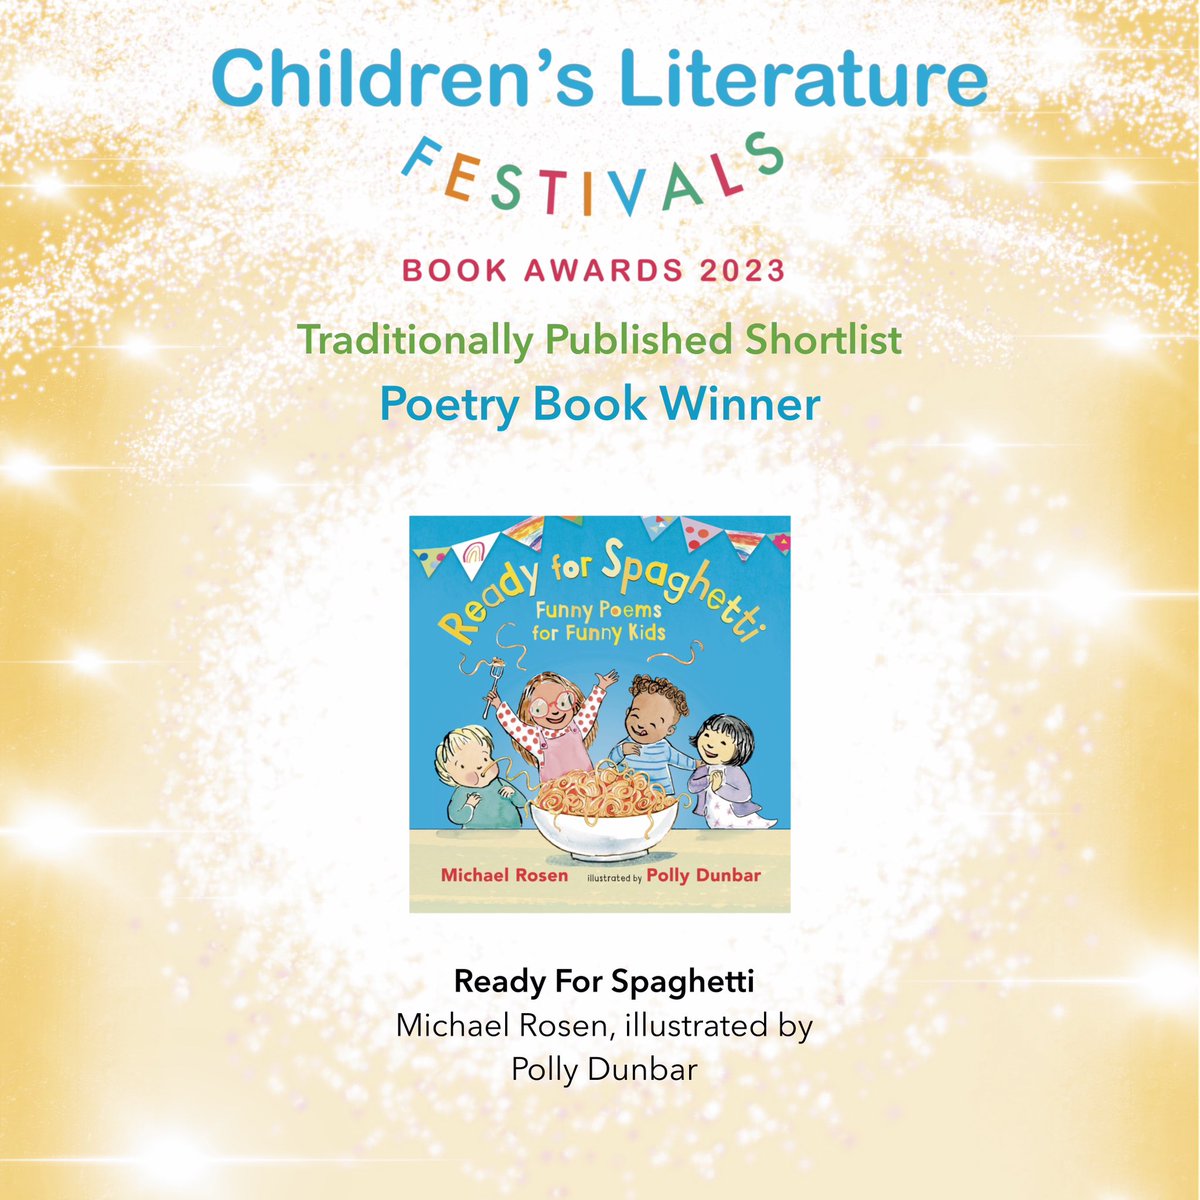 🥁🥁🥁🥁Congratulations! ⭐️⭐️⭐️⭐️ @MichaelRosenYes Winner of the traditionally published #poetry book - in our first #clfbookawards 📚 @ChildrensLFests 
Ready For Spaghetti, Illustrated by @PollyDunbar published by @WalkerBooksUK 
#childrensbookaward #NCDUK2023 🤗